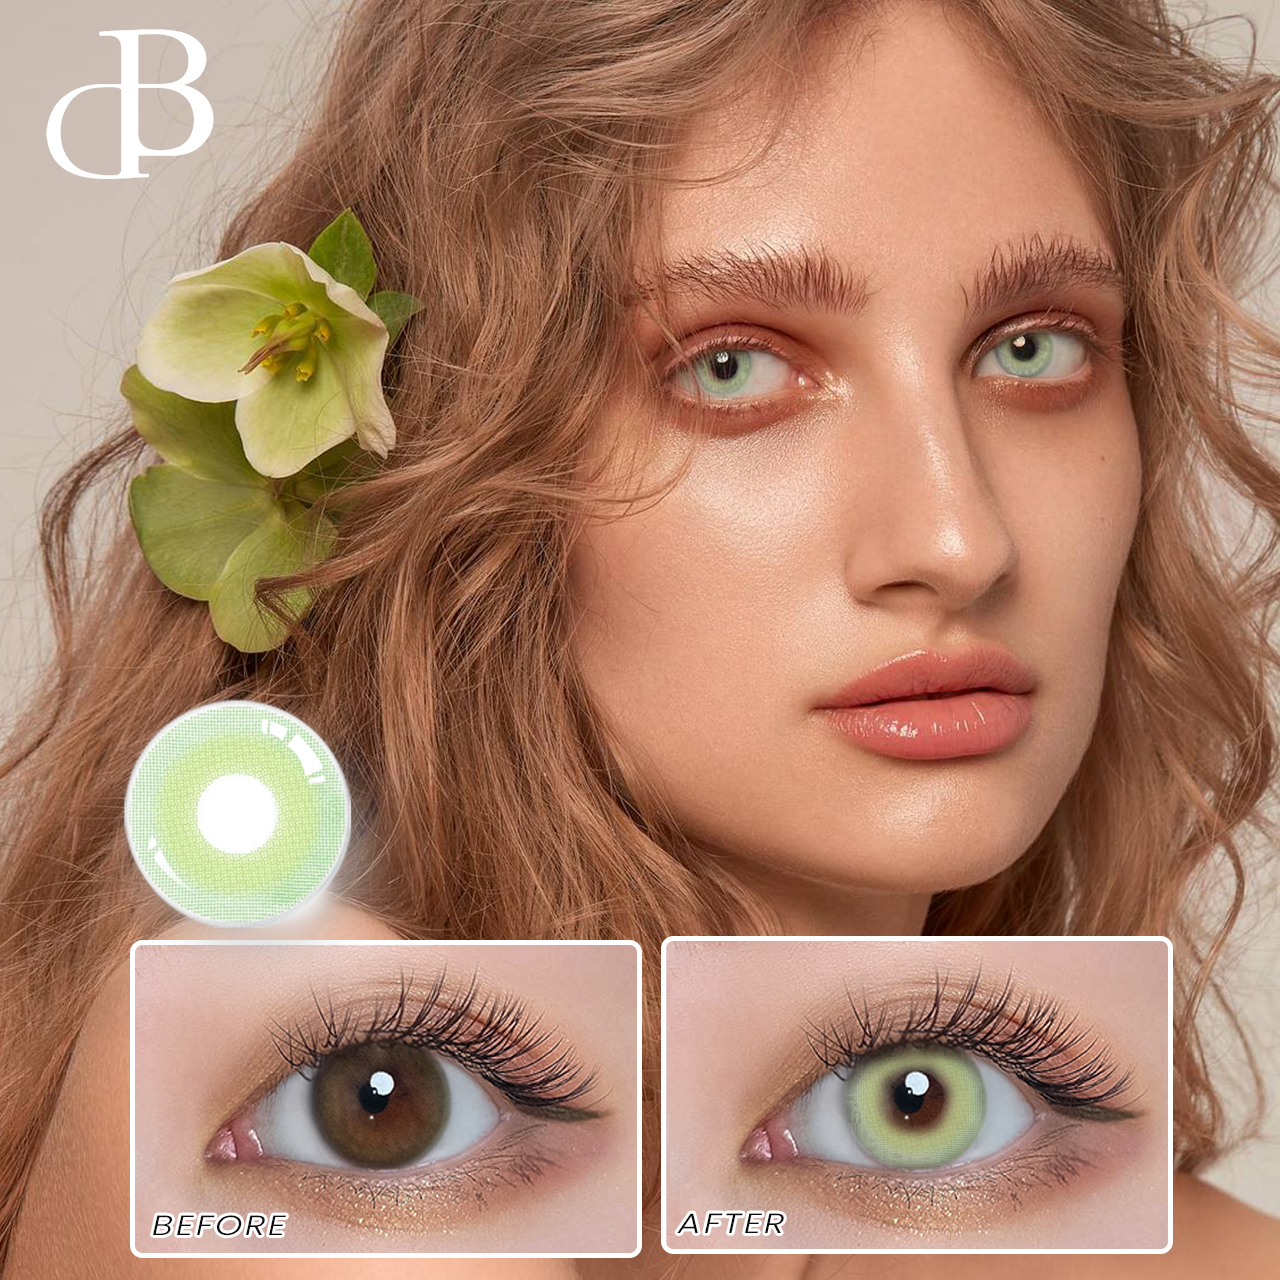 Free Shipping DBeyes Colored Lenses Contacts Eye Makeup Cosmetics Contacted Lens for Cosplay Beauty Color Contact Lenses